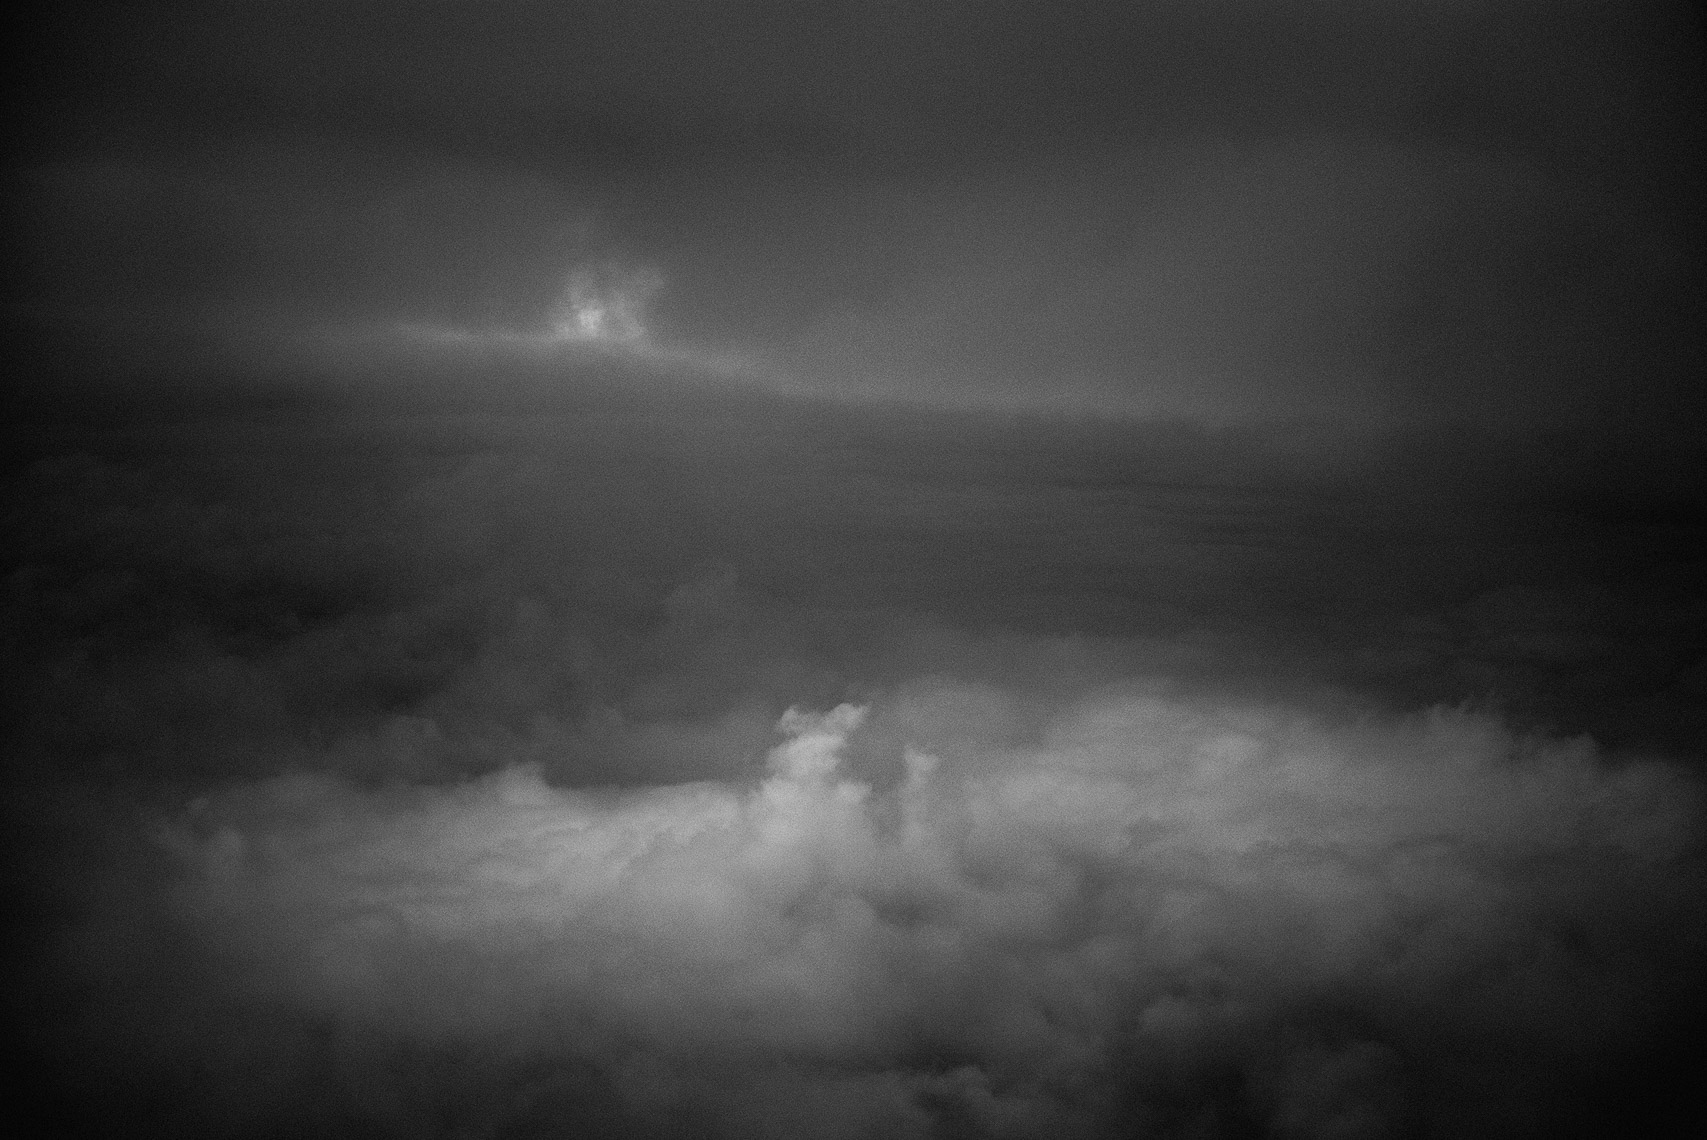 Clouds Full. Ground. Images of the personal interaction between travel and remaining still during my travels.